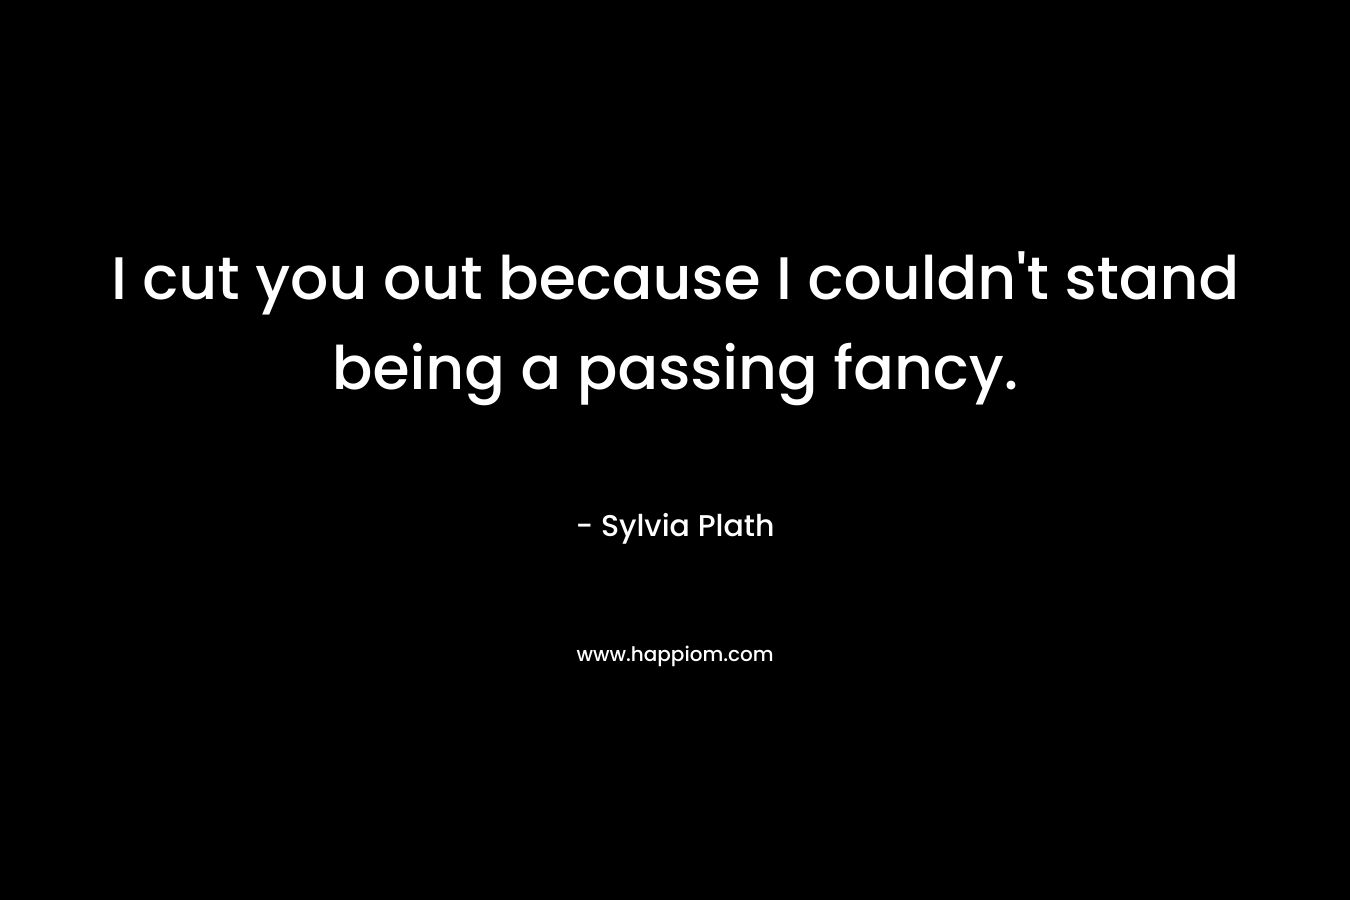 I cut you out because I couldn’t stand being a passing fancy. – Sylvia Plath